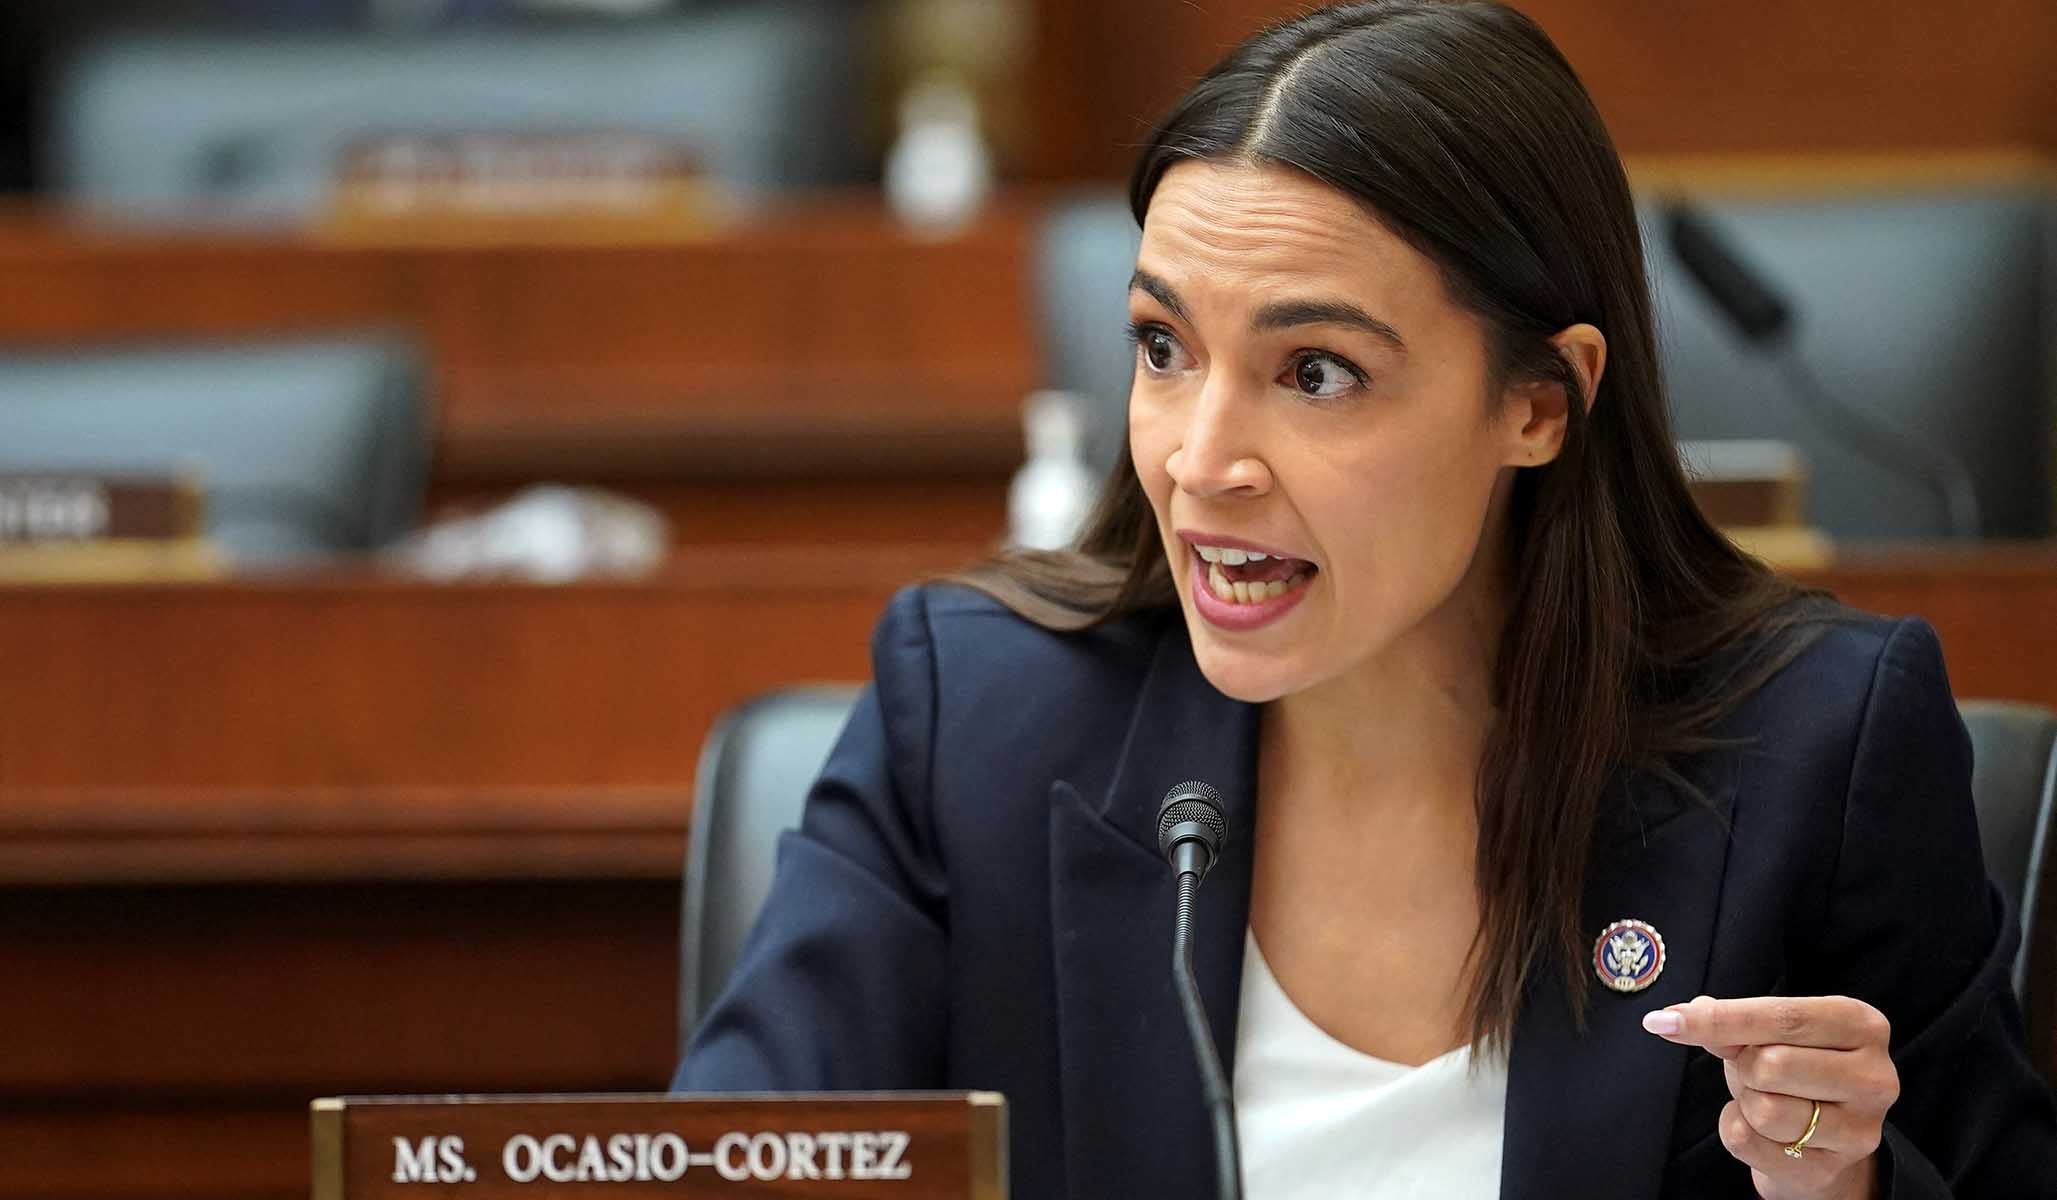 NextImg:‘American Citizens before Migrants’: Protesters Heckle AOC at NYC Town Hall 